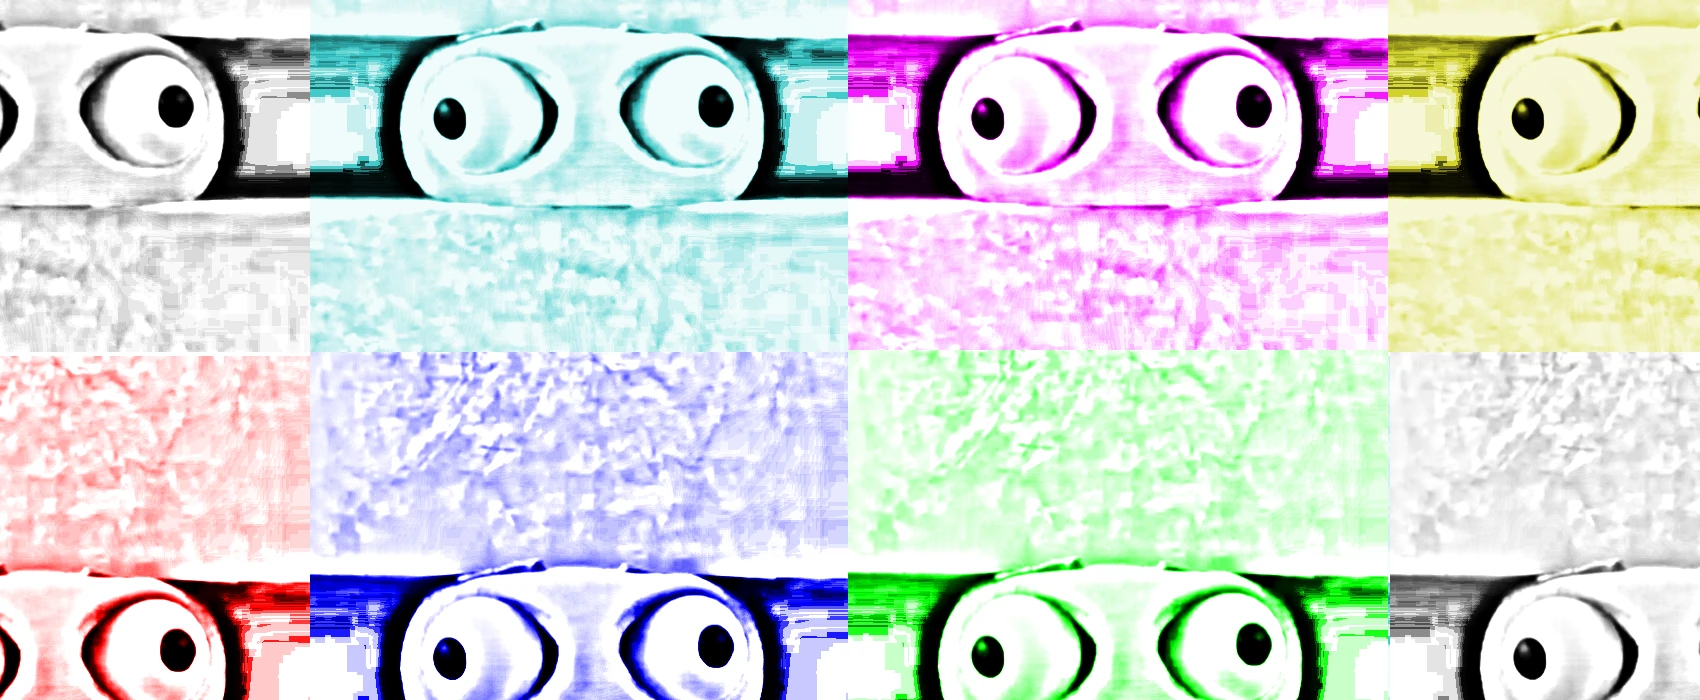 A series of distressed smiley faces in a grid in the style of an Andy Warhol collage. The image is a still from Apple's Crush ad manipulated to appear photocopied and then colorized CYMK and RBG using photo editing software. Own work 2024.